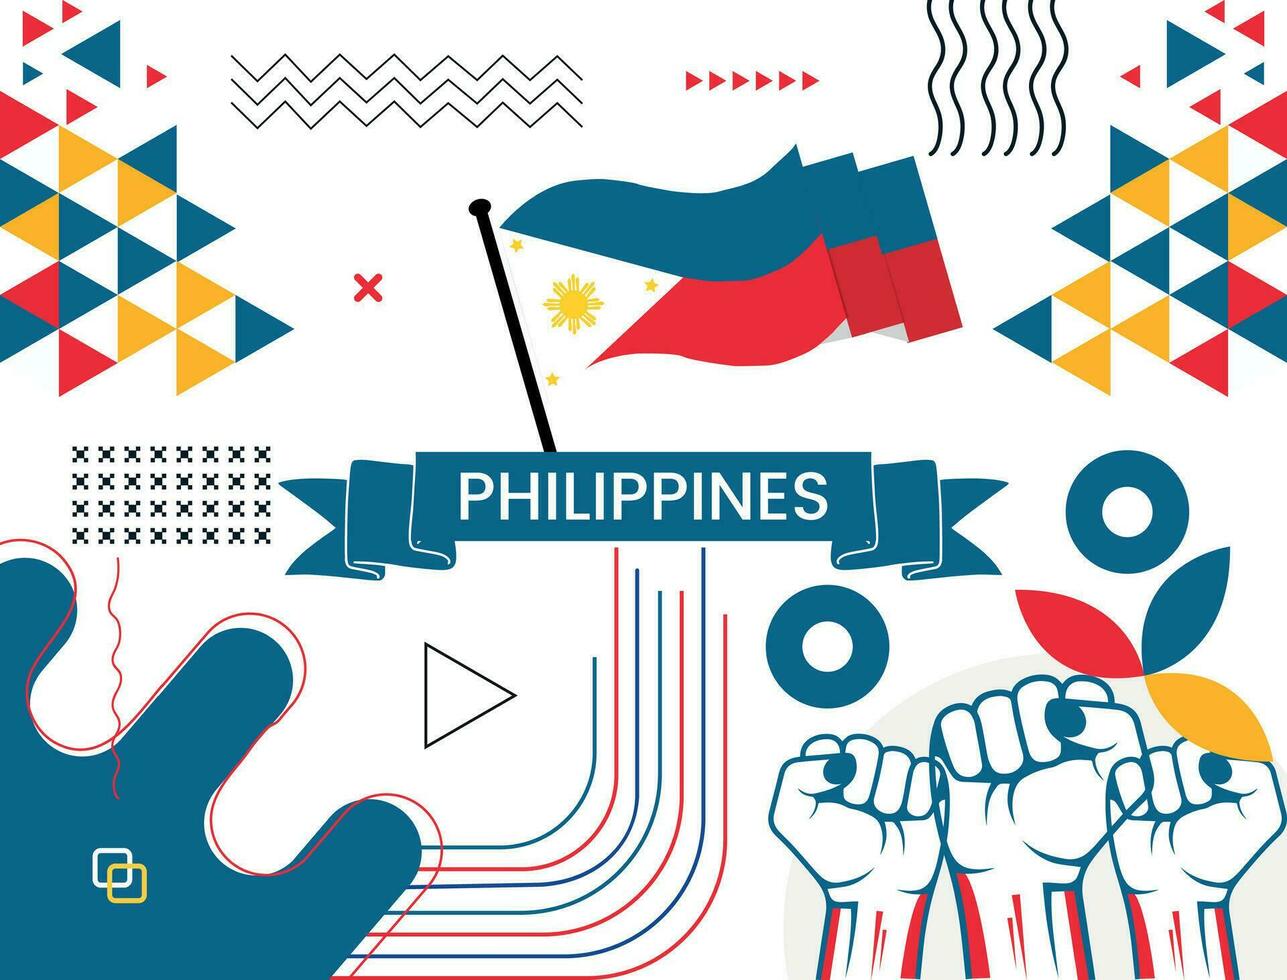 PHILIPPINES Map and raised fists. National day or Independence day design for PHILIPPINES celebration. Modern retro design with abstract icons. Vector illustration.